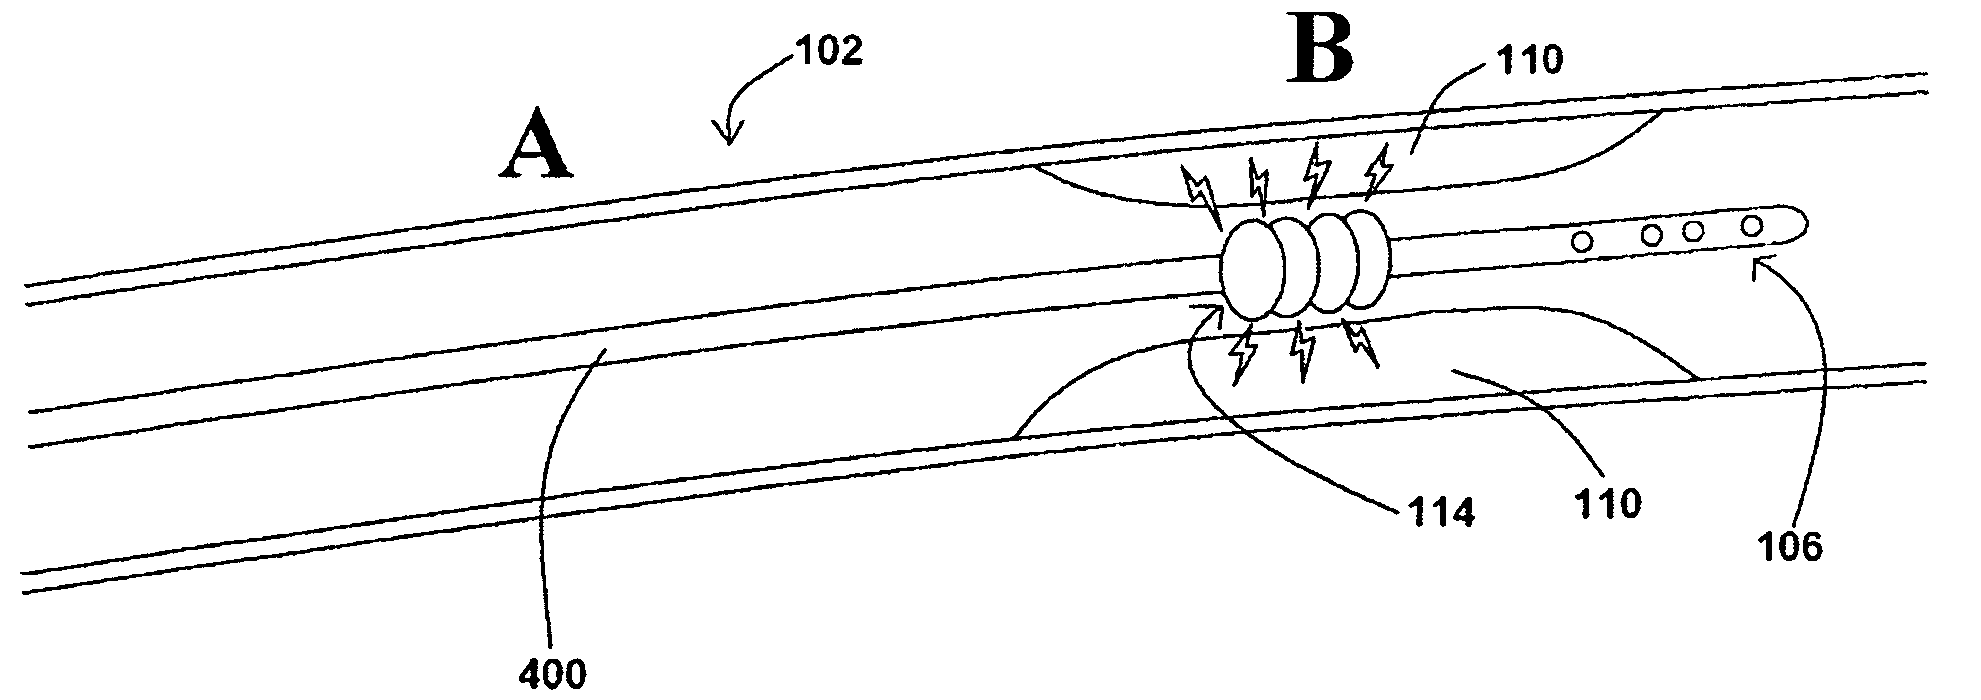 Devices, systems, and methods for removing stenotic lesions from vessels